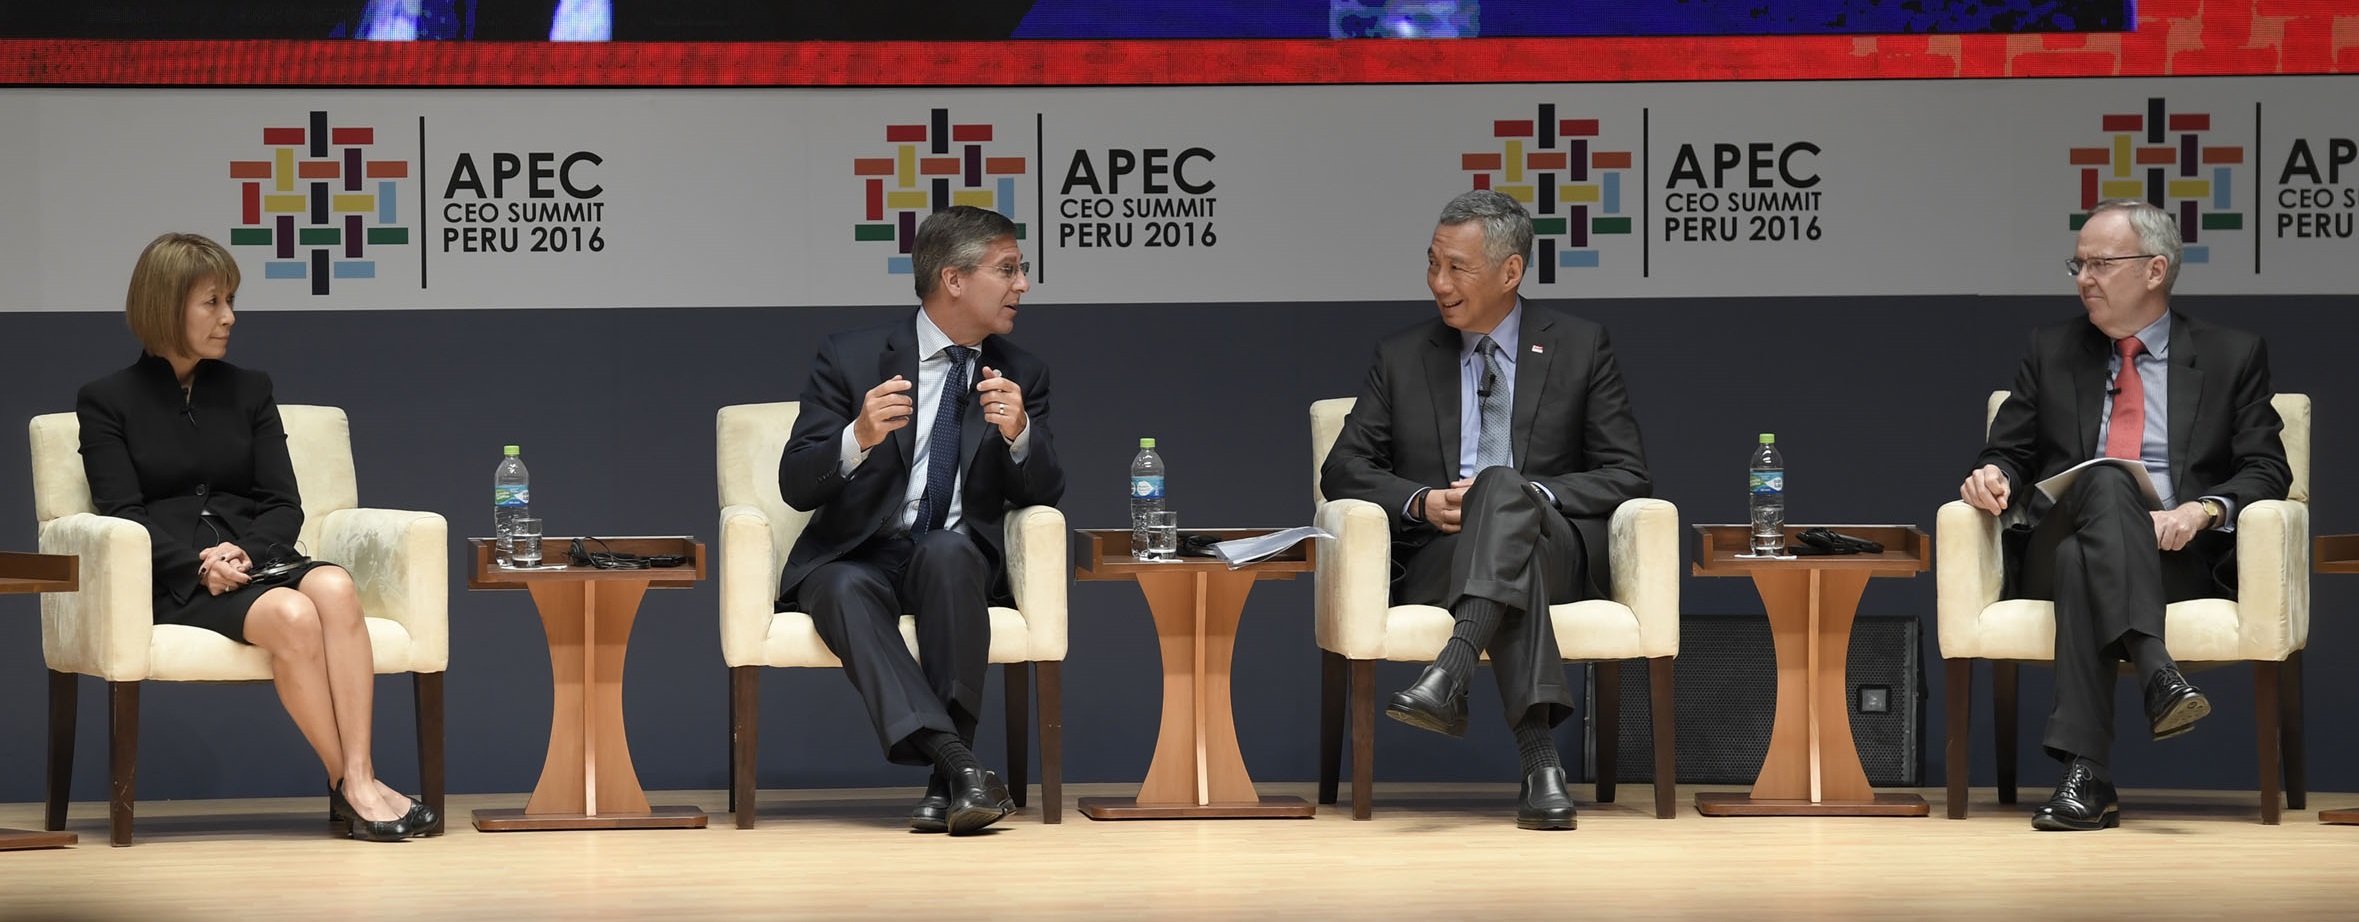 PM Lee at the APEC CEO Summit Forum Discussion on the 